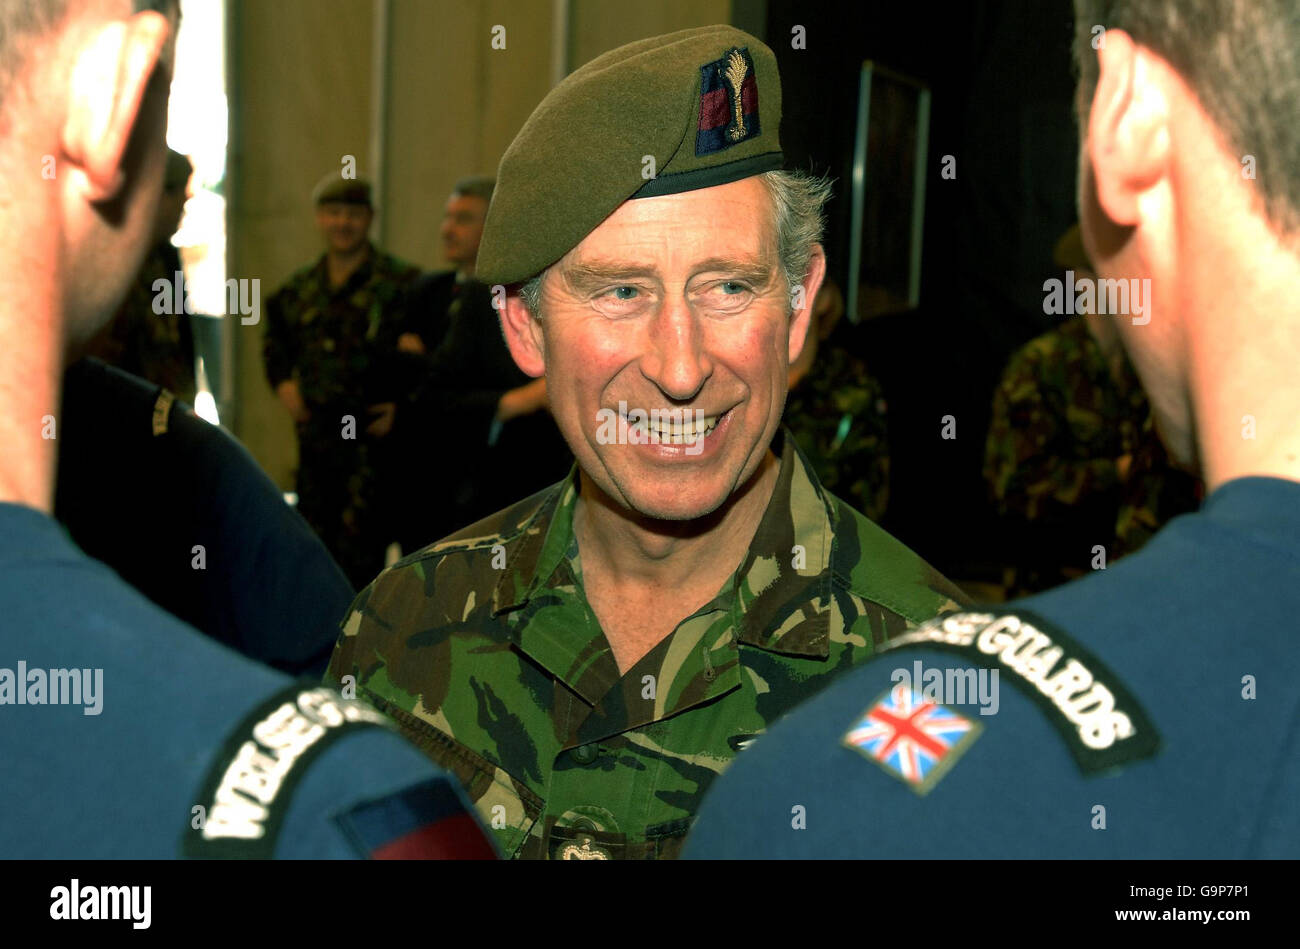 The Prince of Wales, in uniform as the Colonel-in-Chief of the Welsh Guards, speaks to members of the Iron Guardsmen team at Banja Luka Metal Factory in Bosnia. Stock Photo